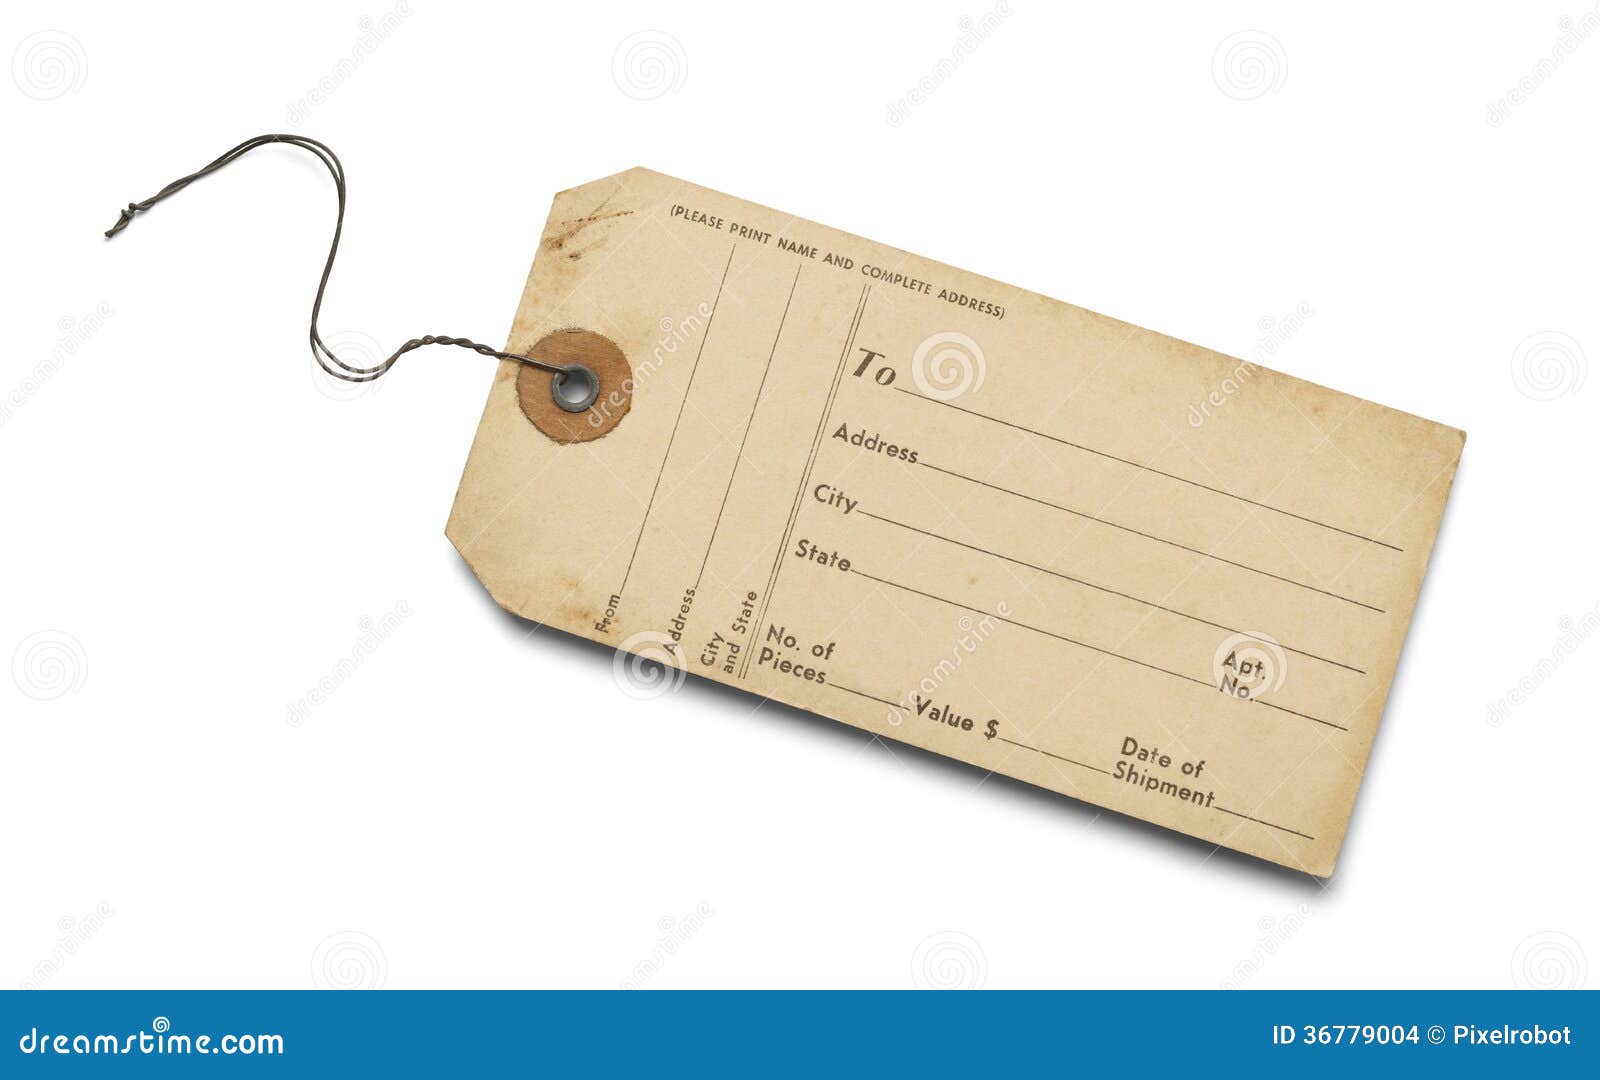 Fabric Luggage Tag ID Bag Tag in Vintage Airline Print